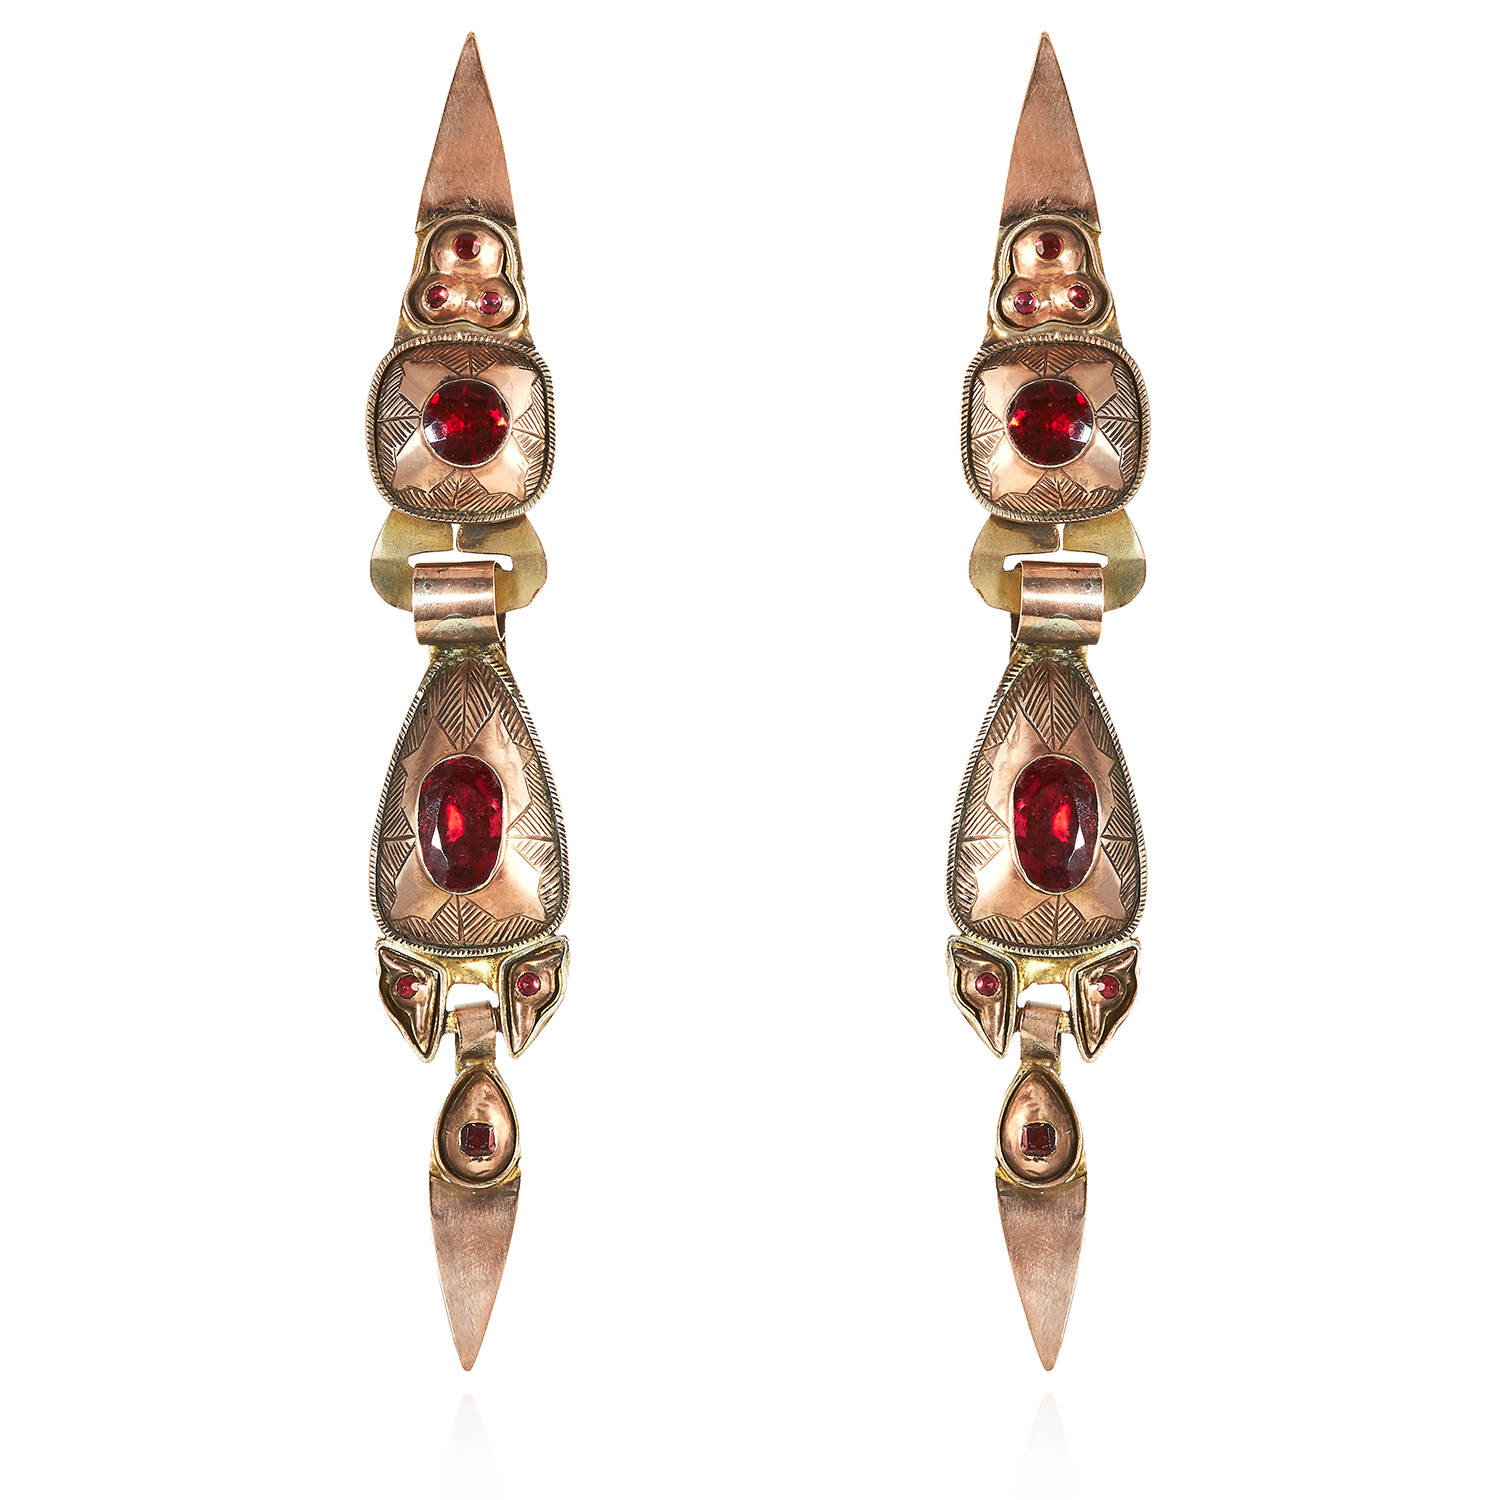 A PAIR OF ANTIQUE CATALAN HESSONITE GARNET EARRINGS, SPANISH EARLY 19TH CENTURY in high carat yellow